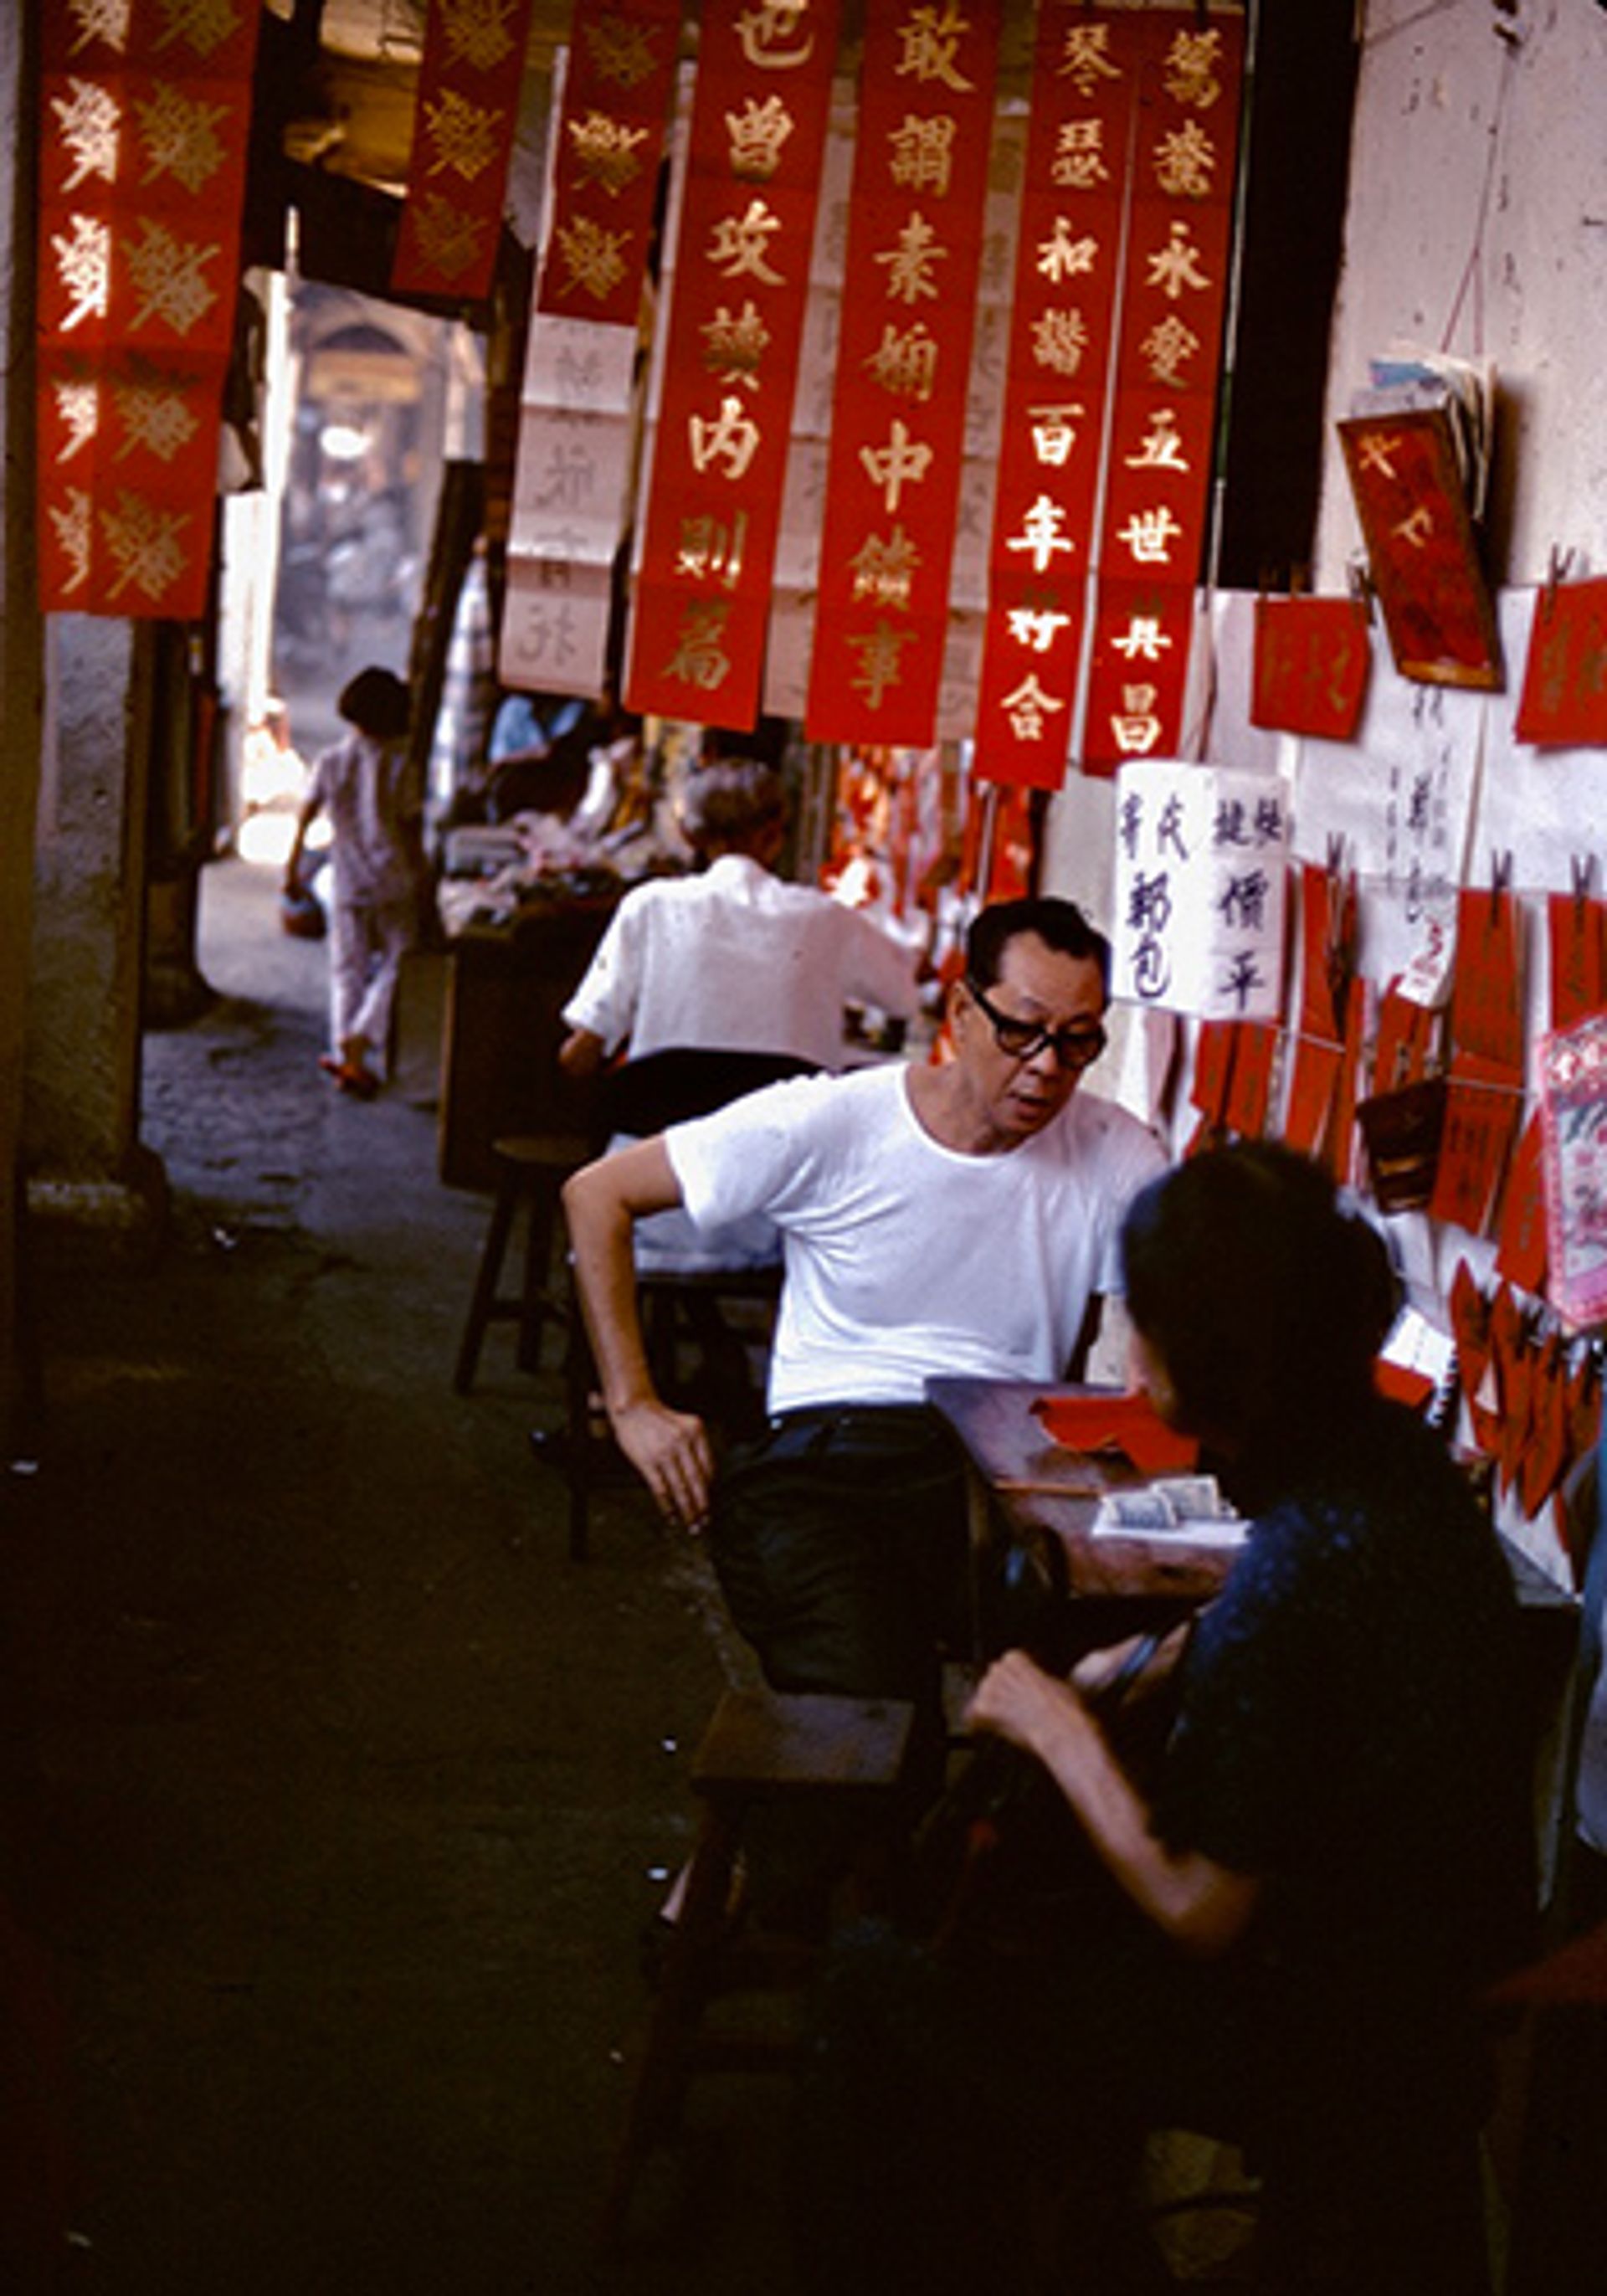 Before universal compulsory education, many Singaporeans were unable to read and write and depended on “letter writers” to help them with their correspondence. Photographed in the late 1970s in Chinatown.